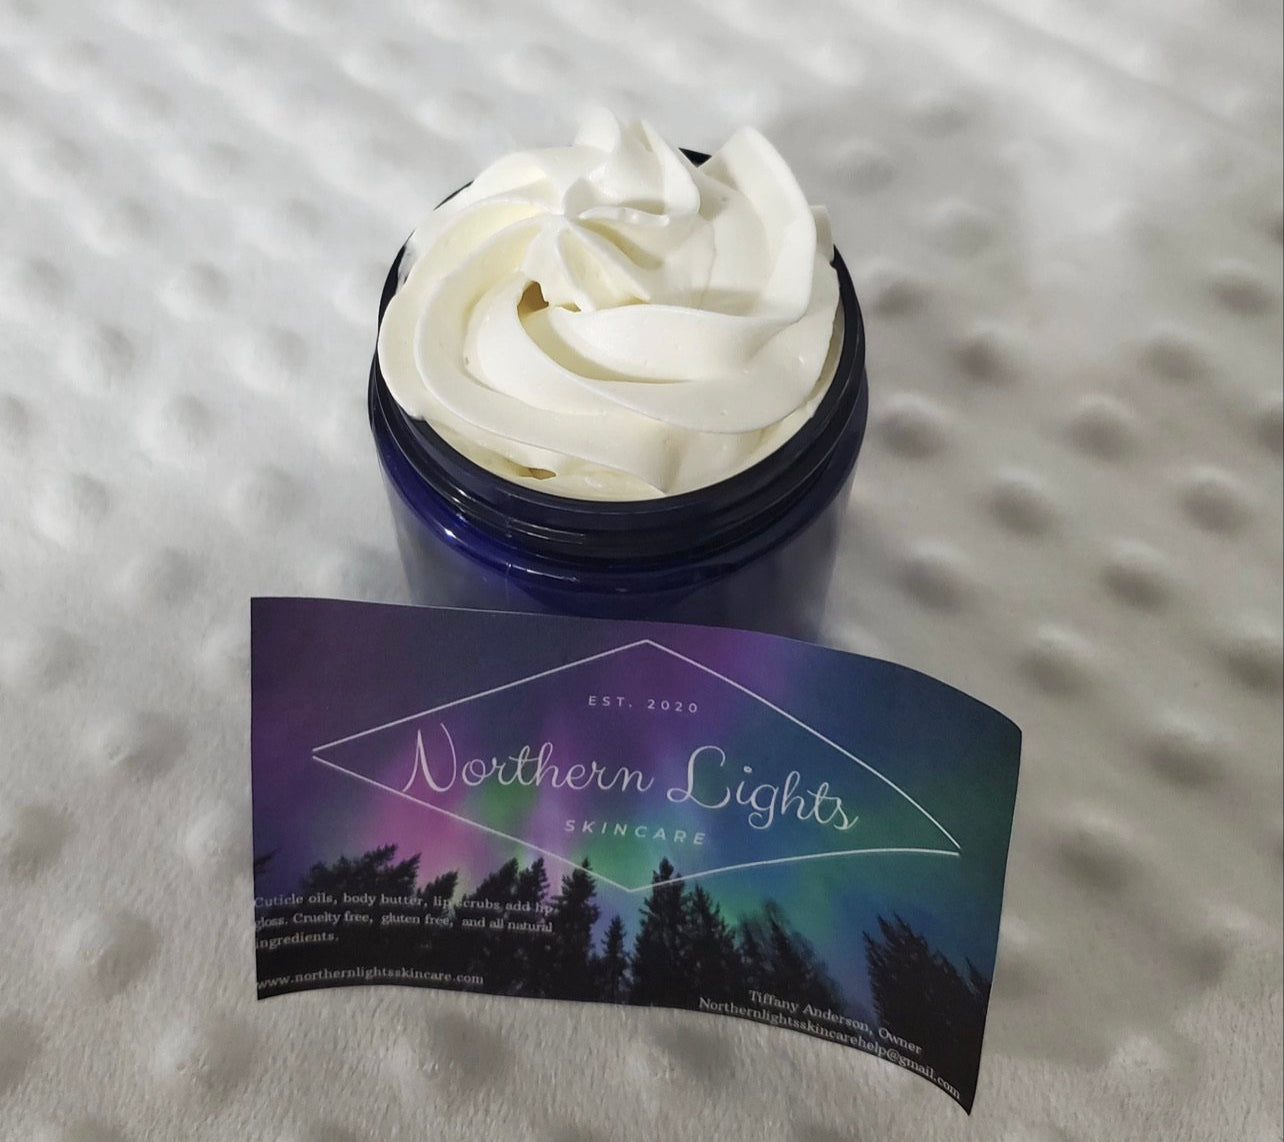 Berries and Cream Whipped Body Butter (retiring)